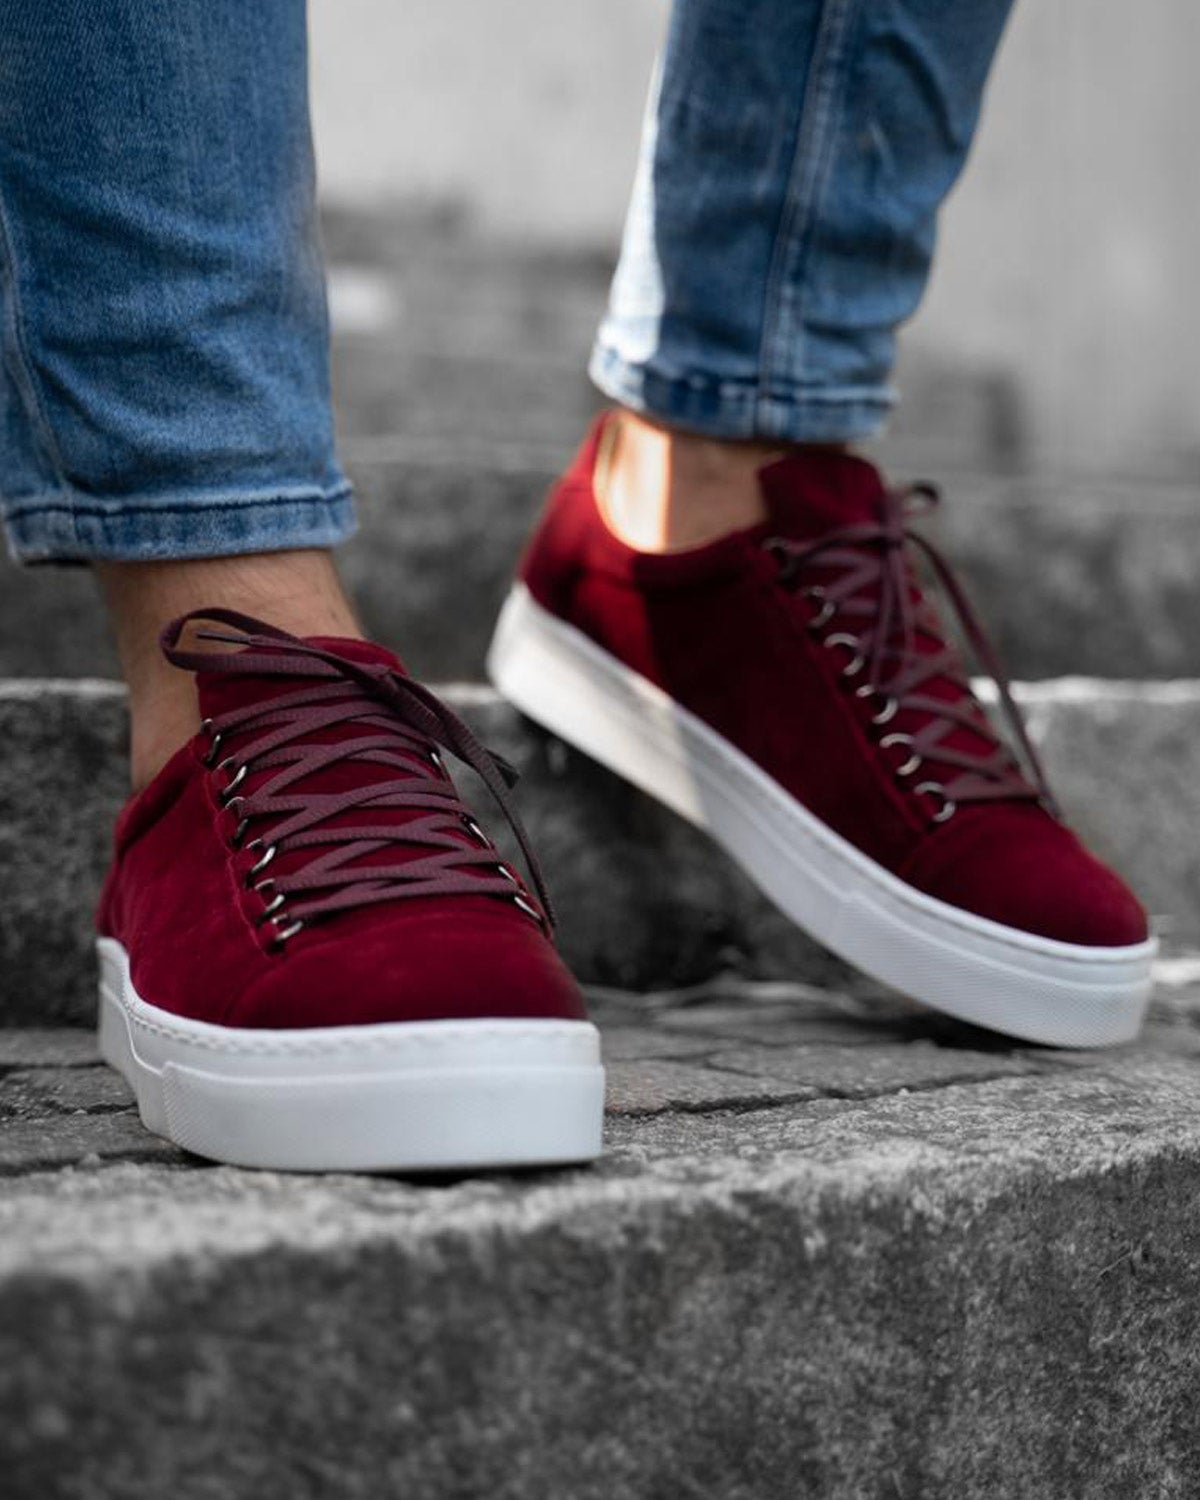 Burgundy leather look lace-up sneakers with white sole for men